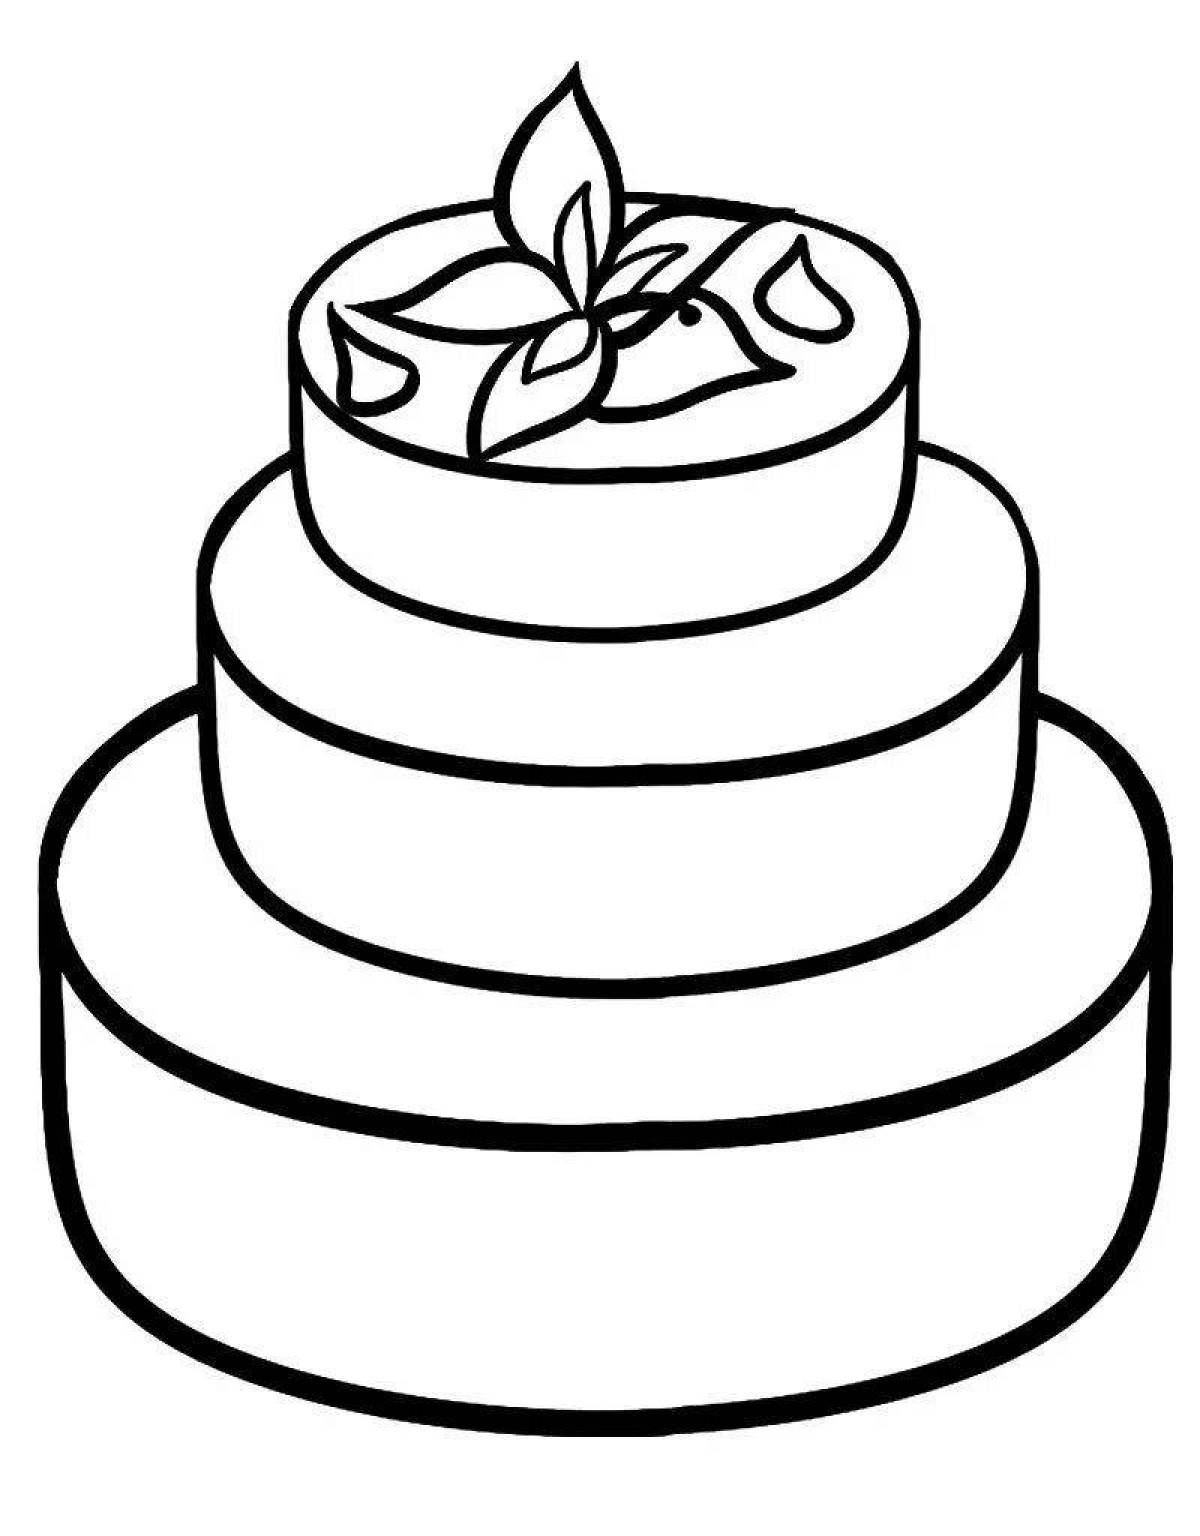 Fabulous cake coloring page